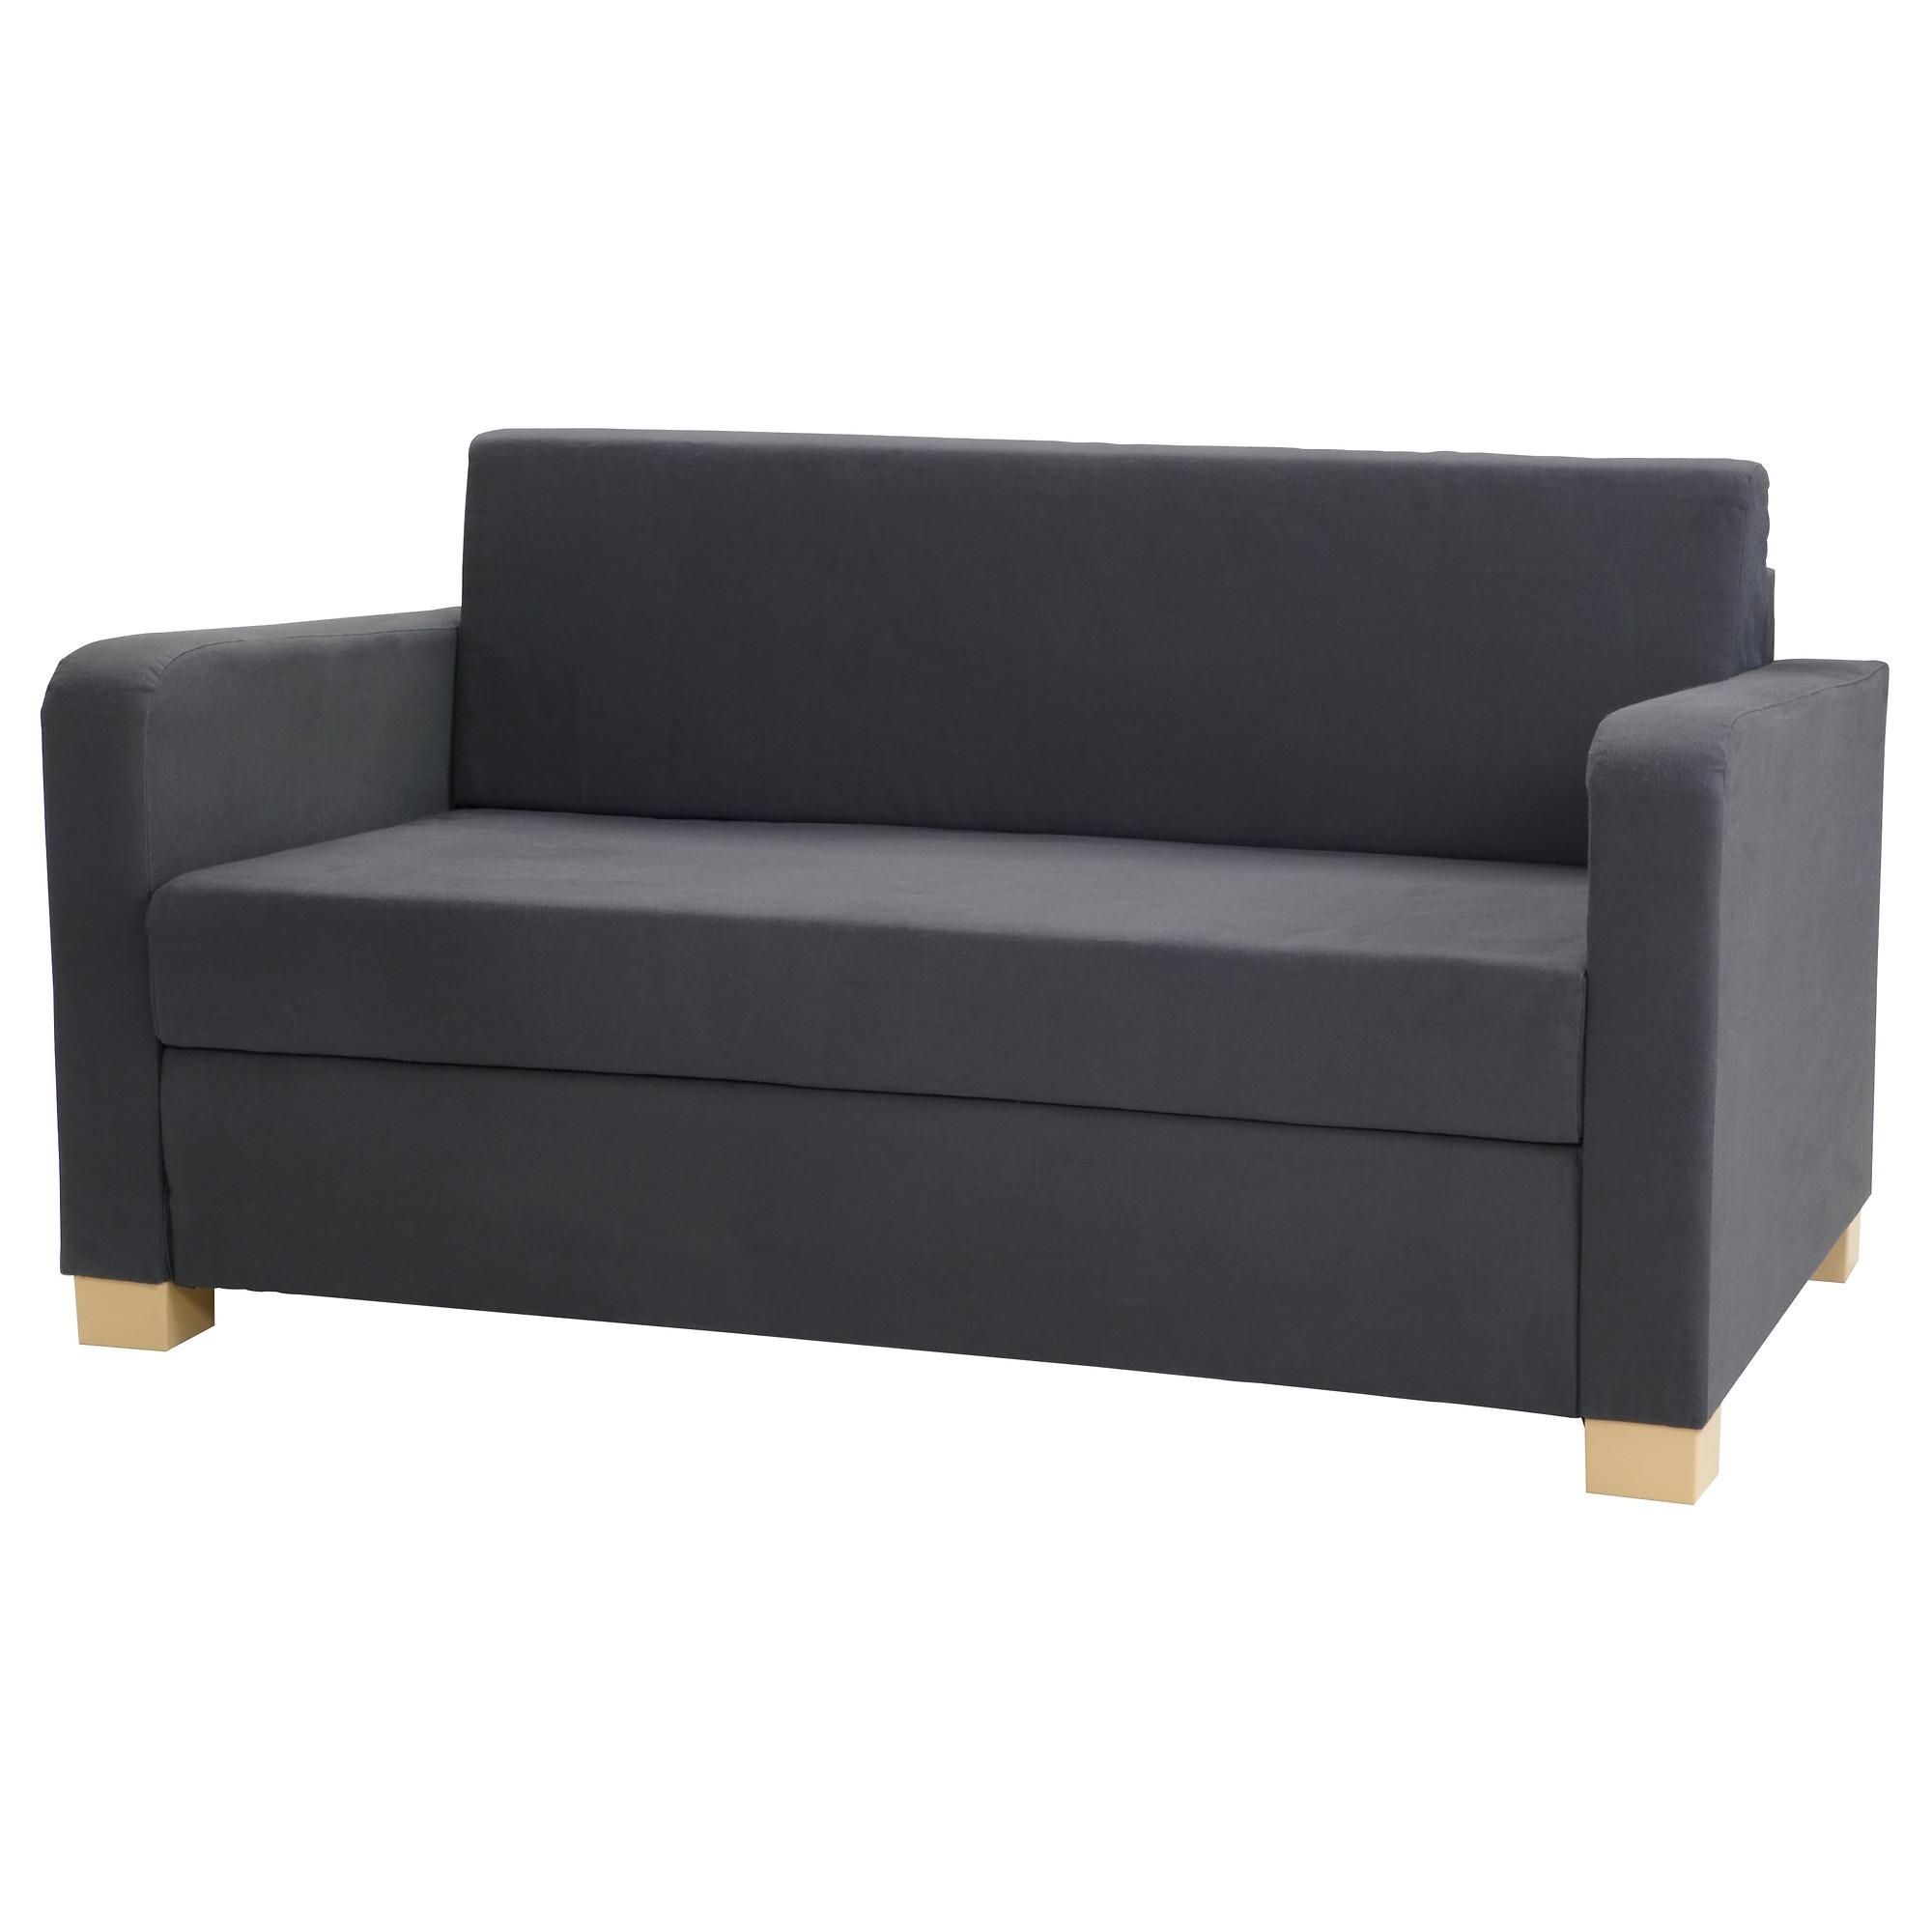 Sofa Beds & Futons – Ikea In Footstool Pouffe Sofa Folding Bed (View 10 of 20)